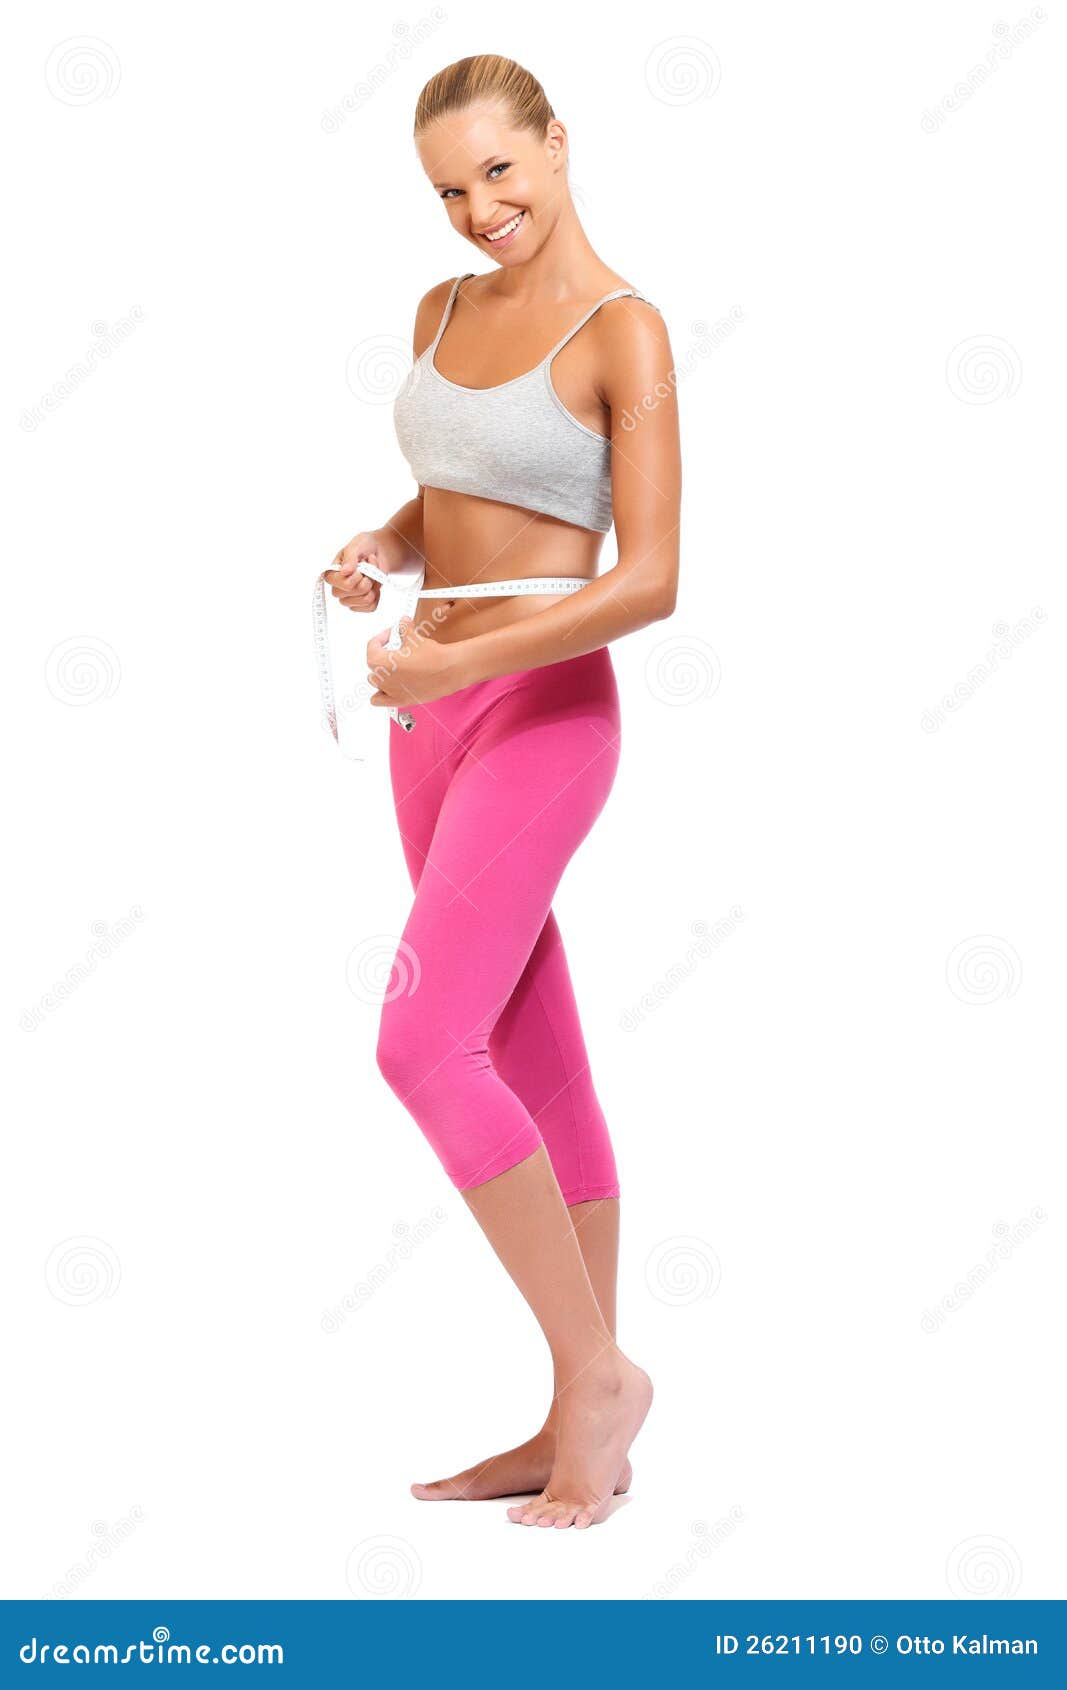 Young barefoot woman in leggings and pullover stretching legs